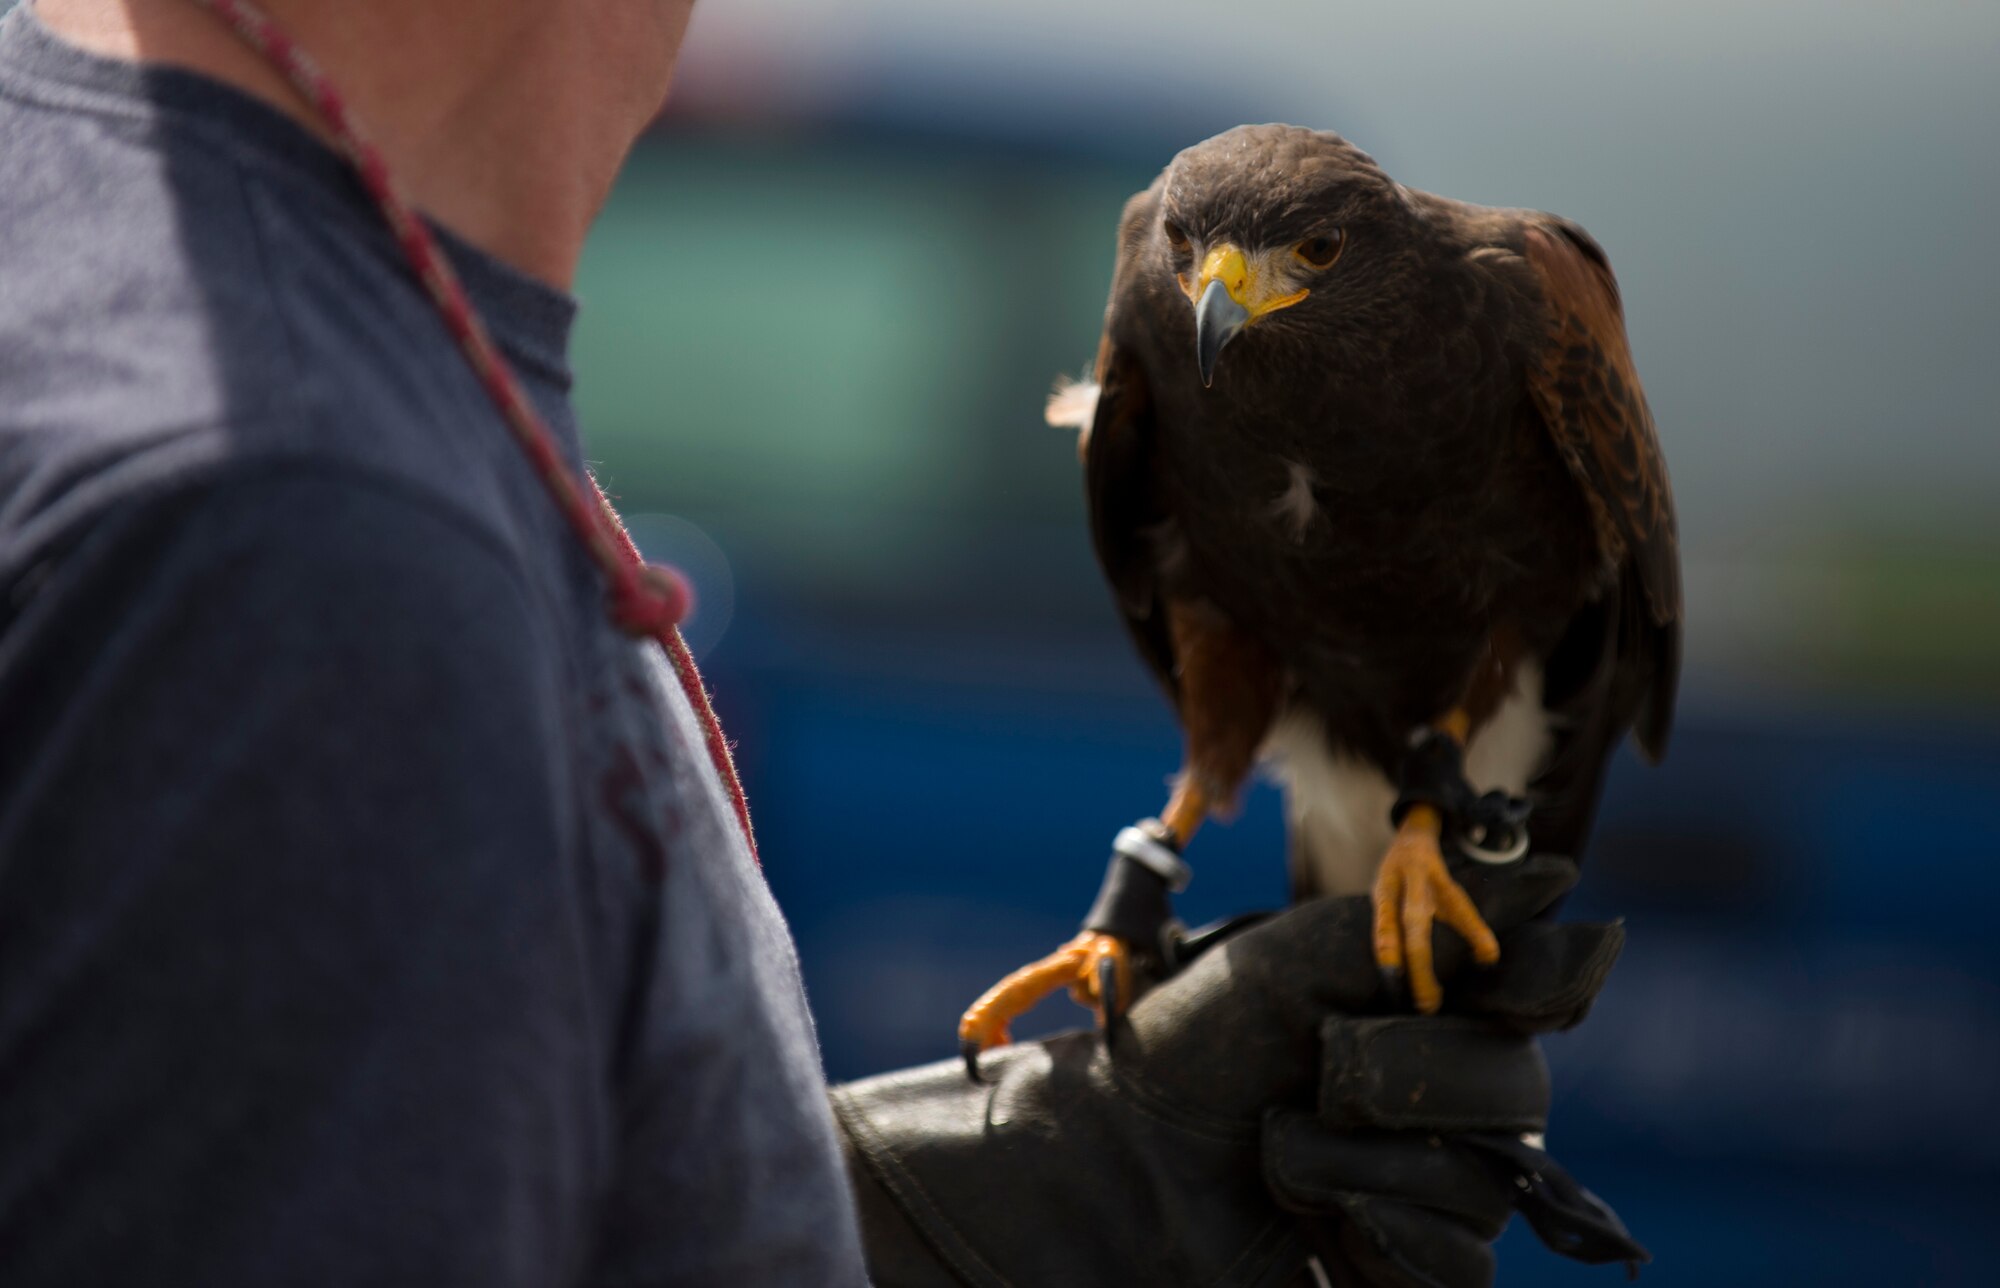 A hunting falcon rests on the hand of Paul Maus, a falconer apprentice, during a demonstration of the falcon’s capabilities alongside the flightline at Spangdahlem Air Base, Germany, May 4, 2015. Maus and Jens Fleer, the base’s primary falconer, use multiple birds a few times a week to keep the flightline clear of different animals. (U.S. Air Force photo by Airman 1st Class Luke Kitterman/Released)